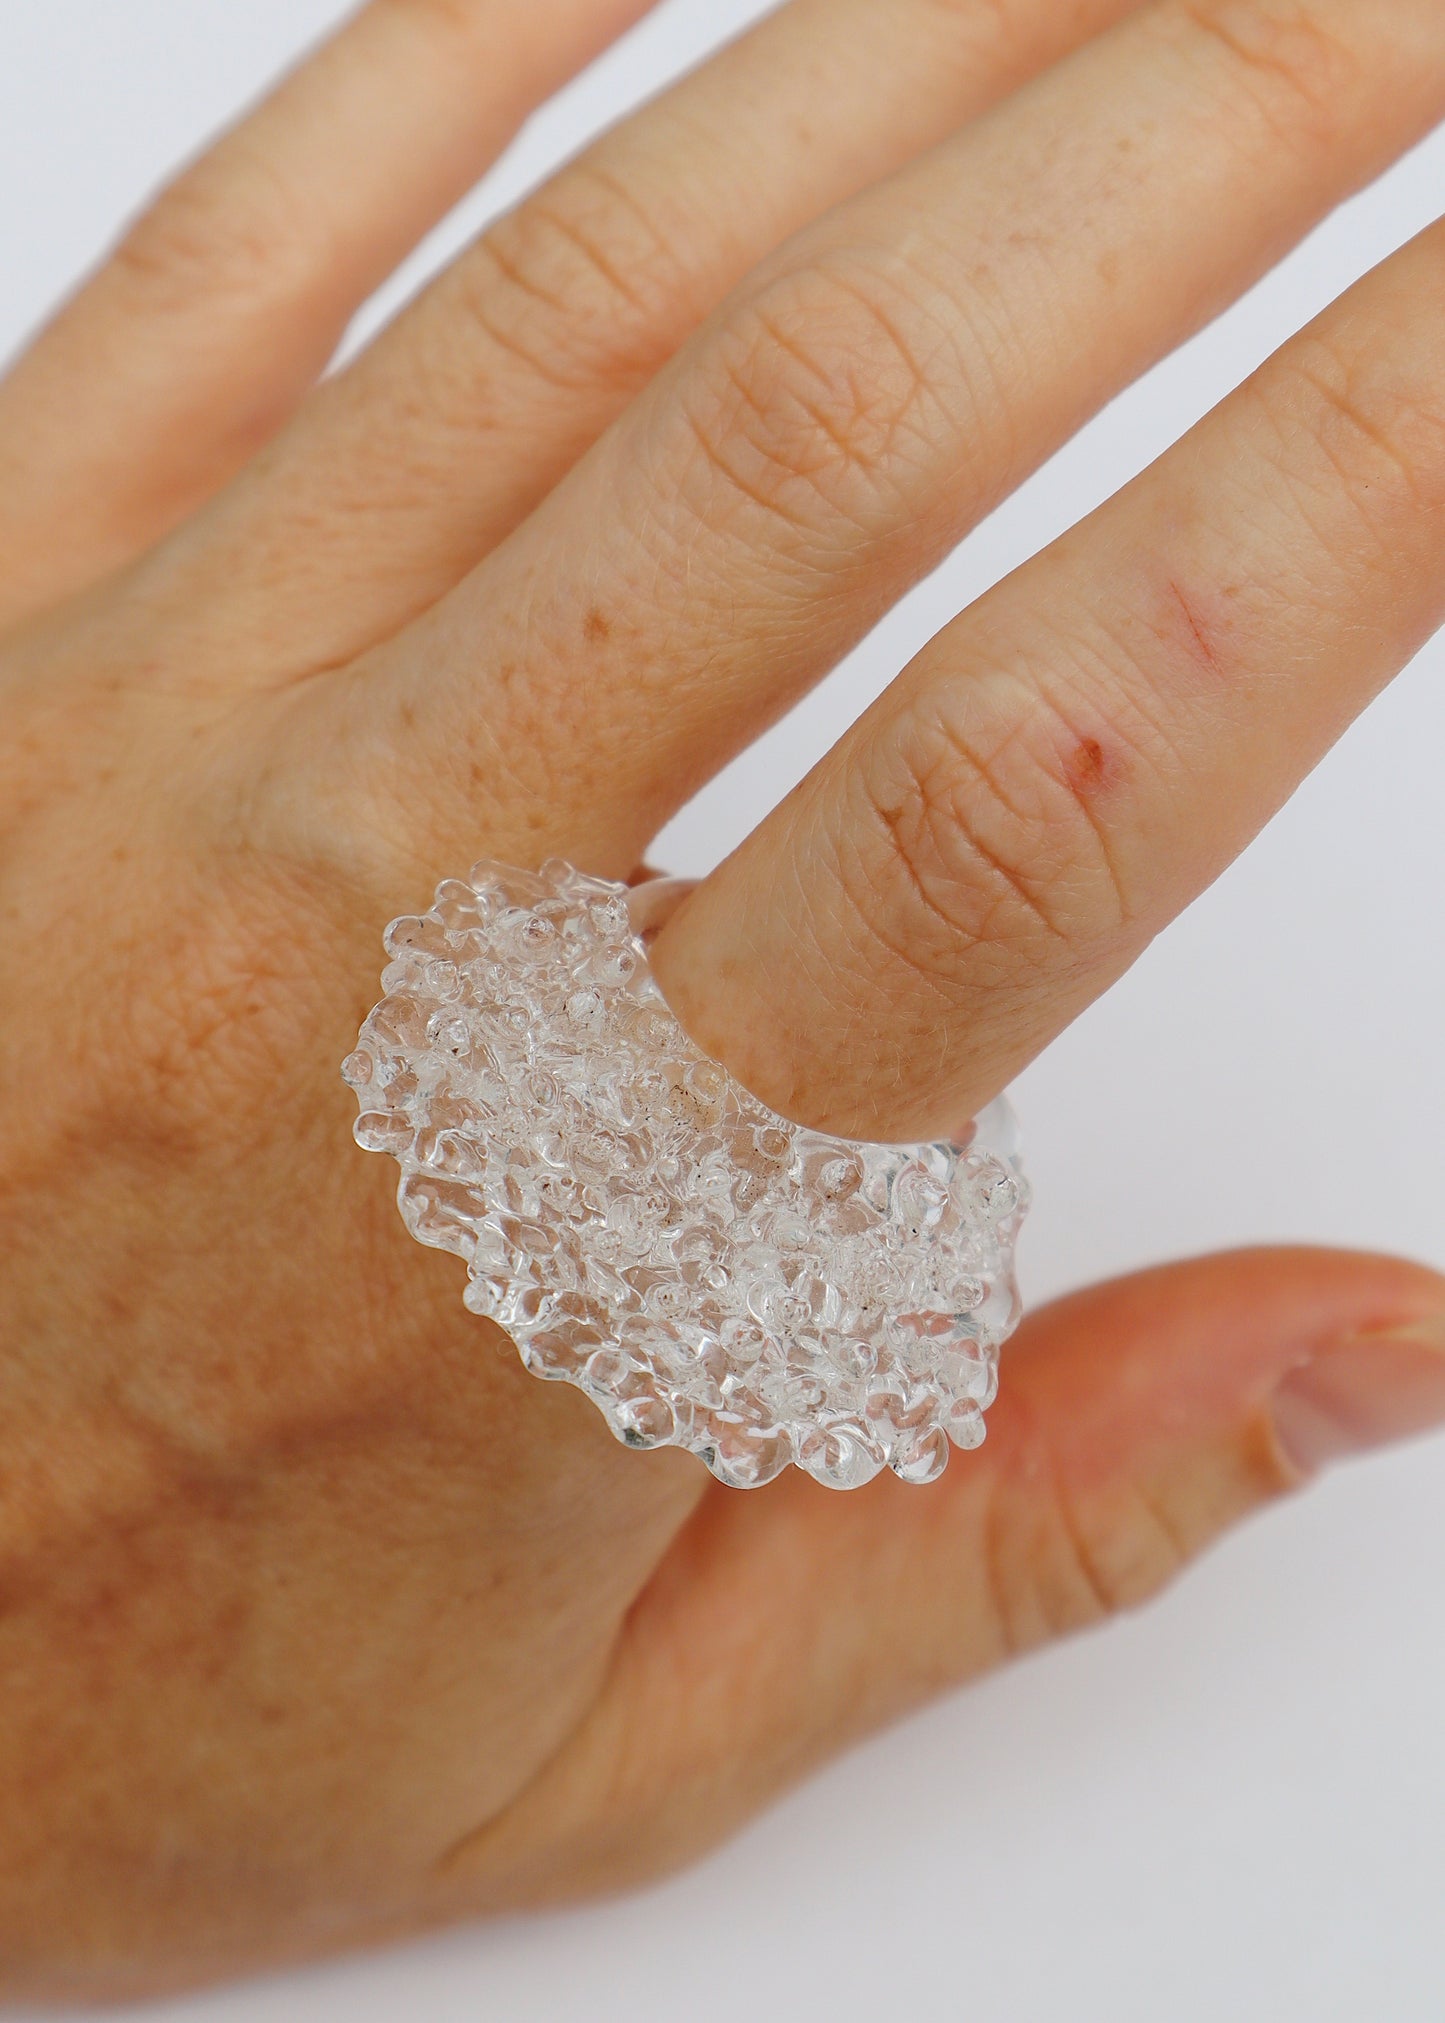 35% OFF SALE - Large Clear Textured Statement Ring // Size 9